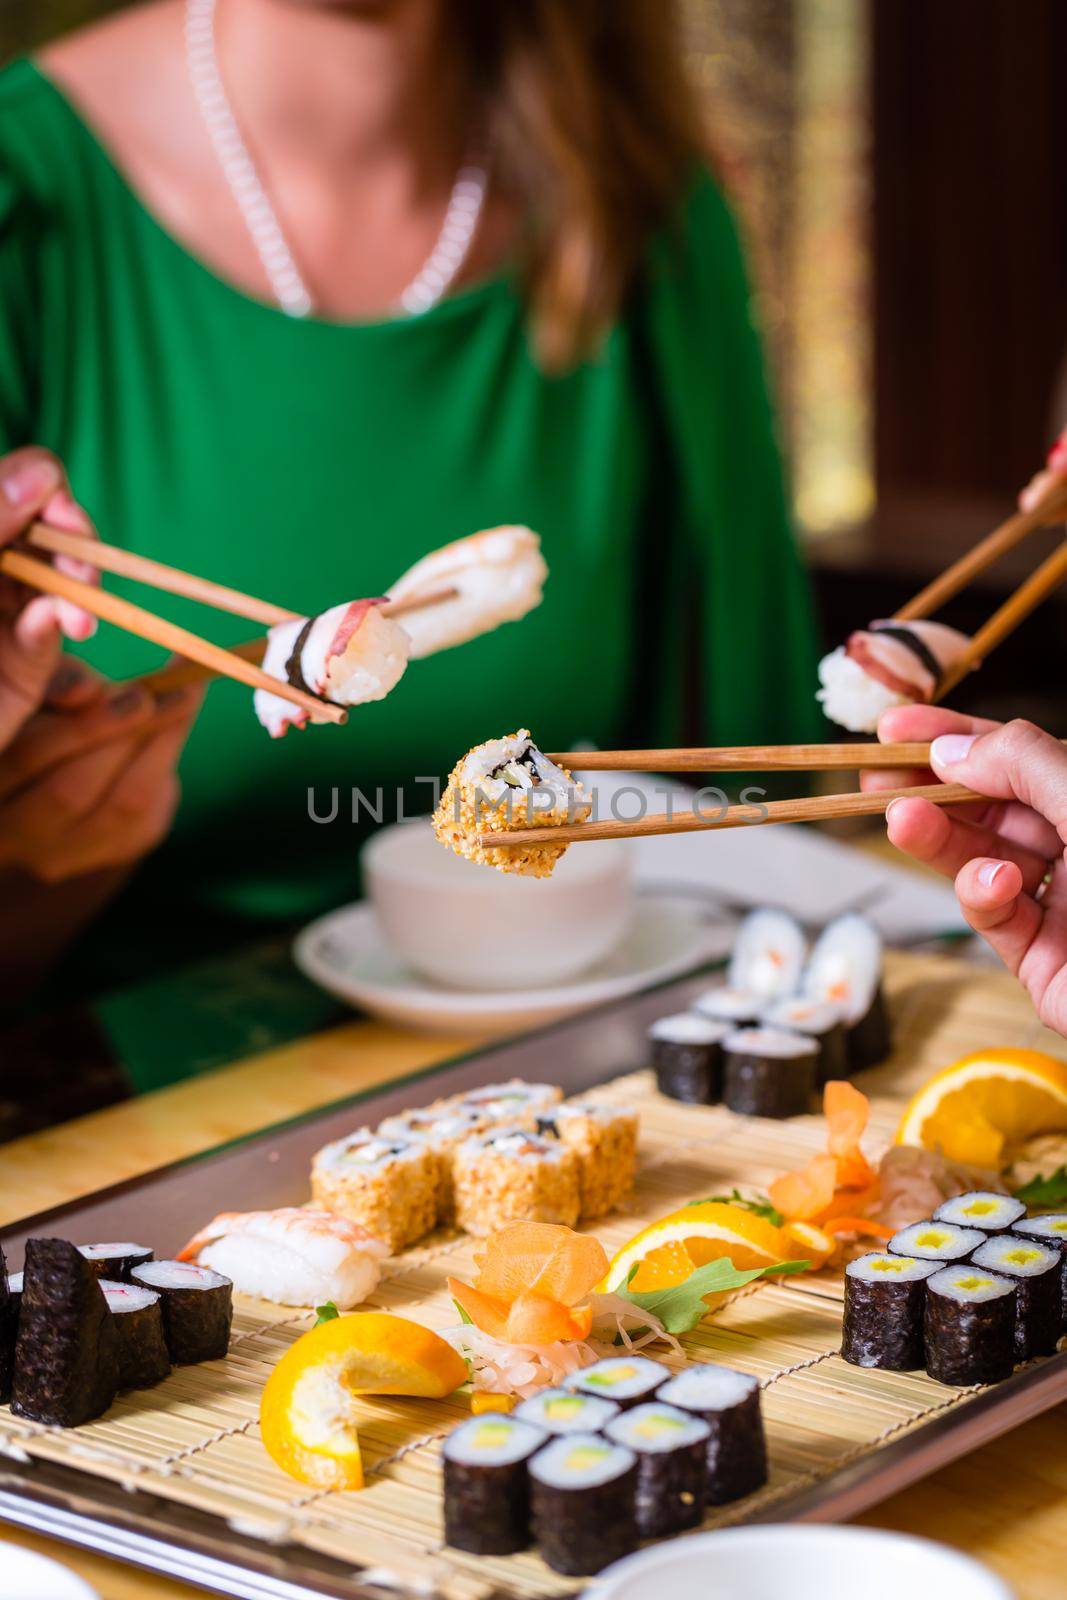 Young people eating sushi in Asian restaurant by Kzenon